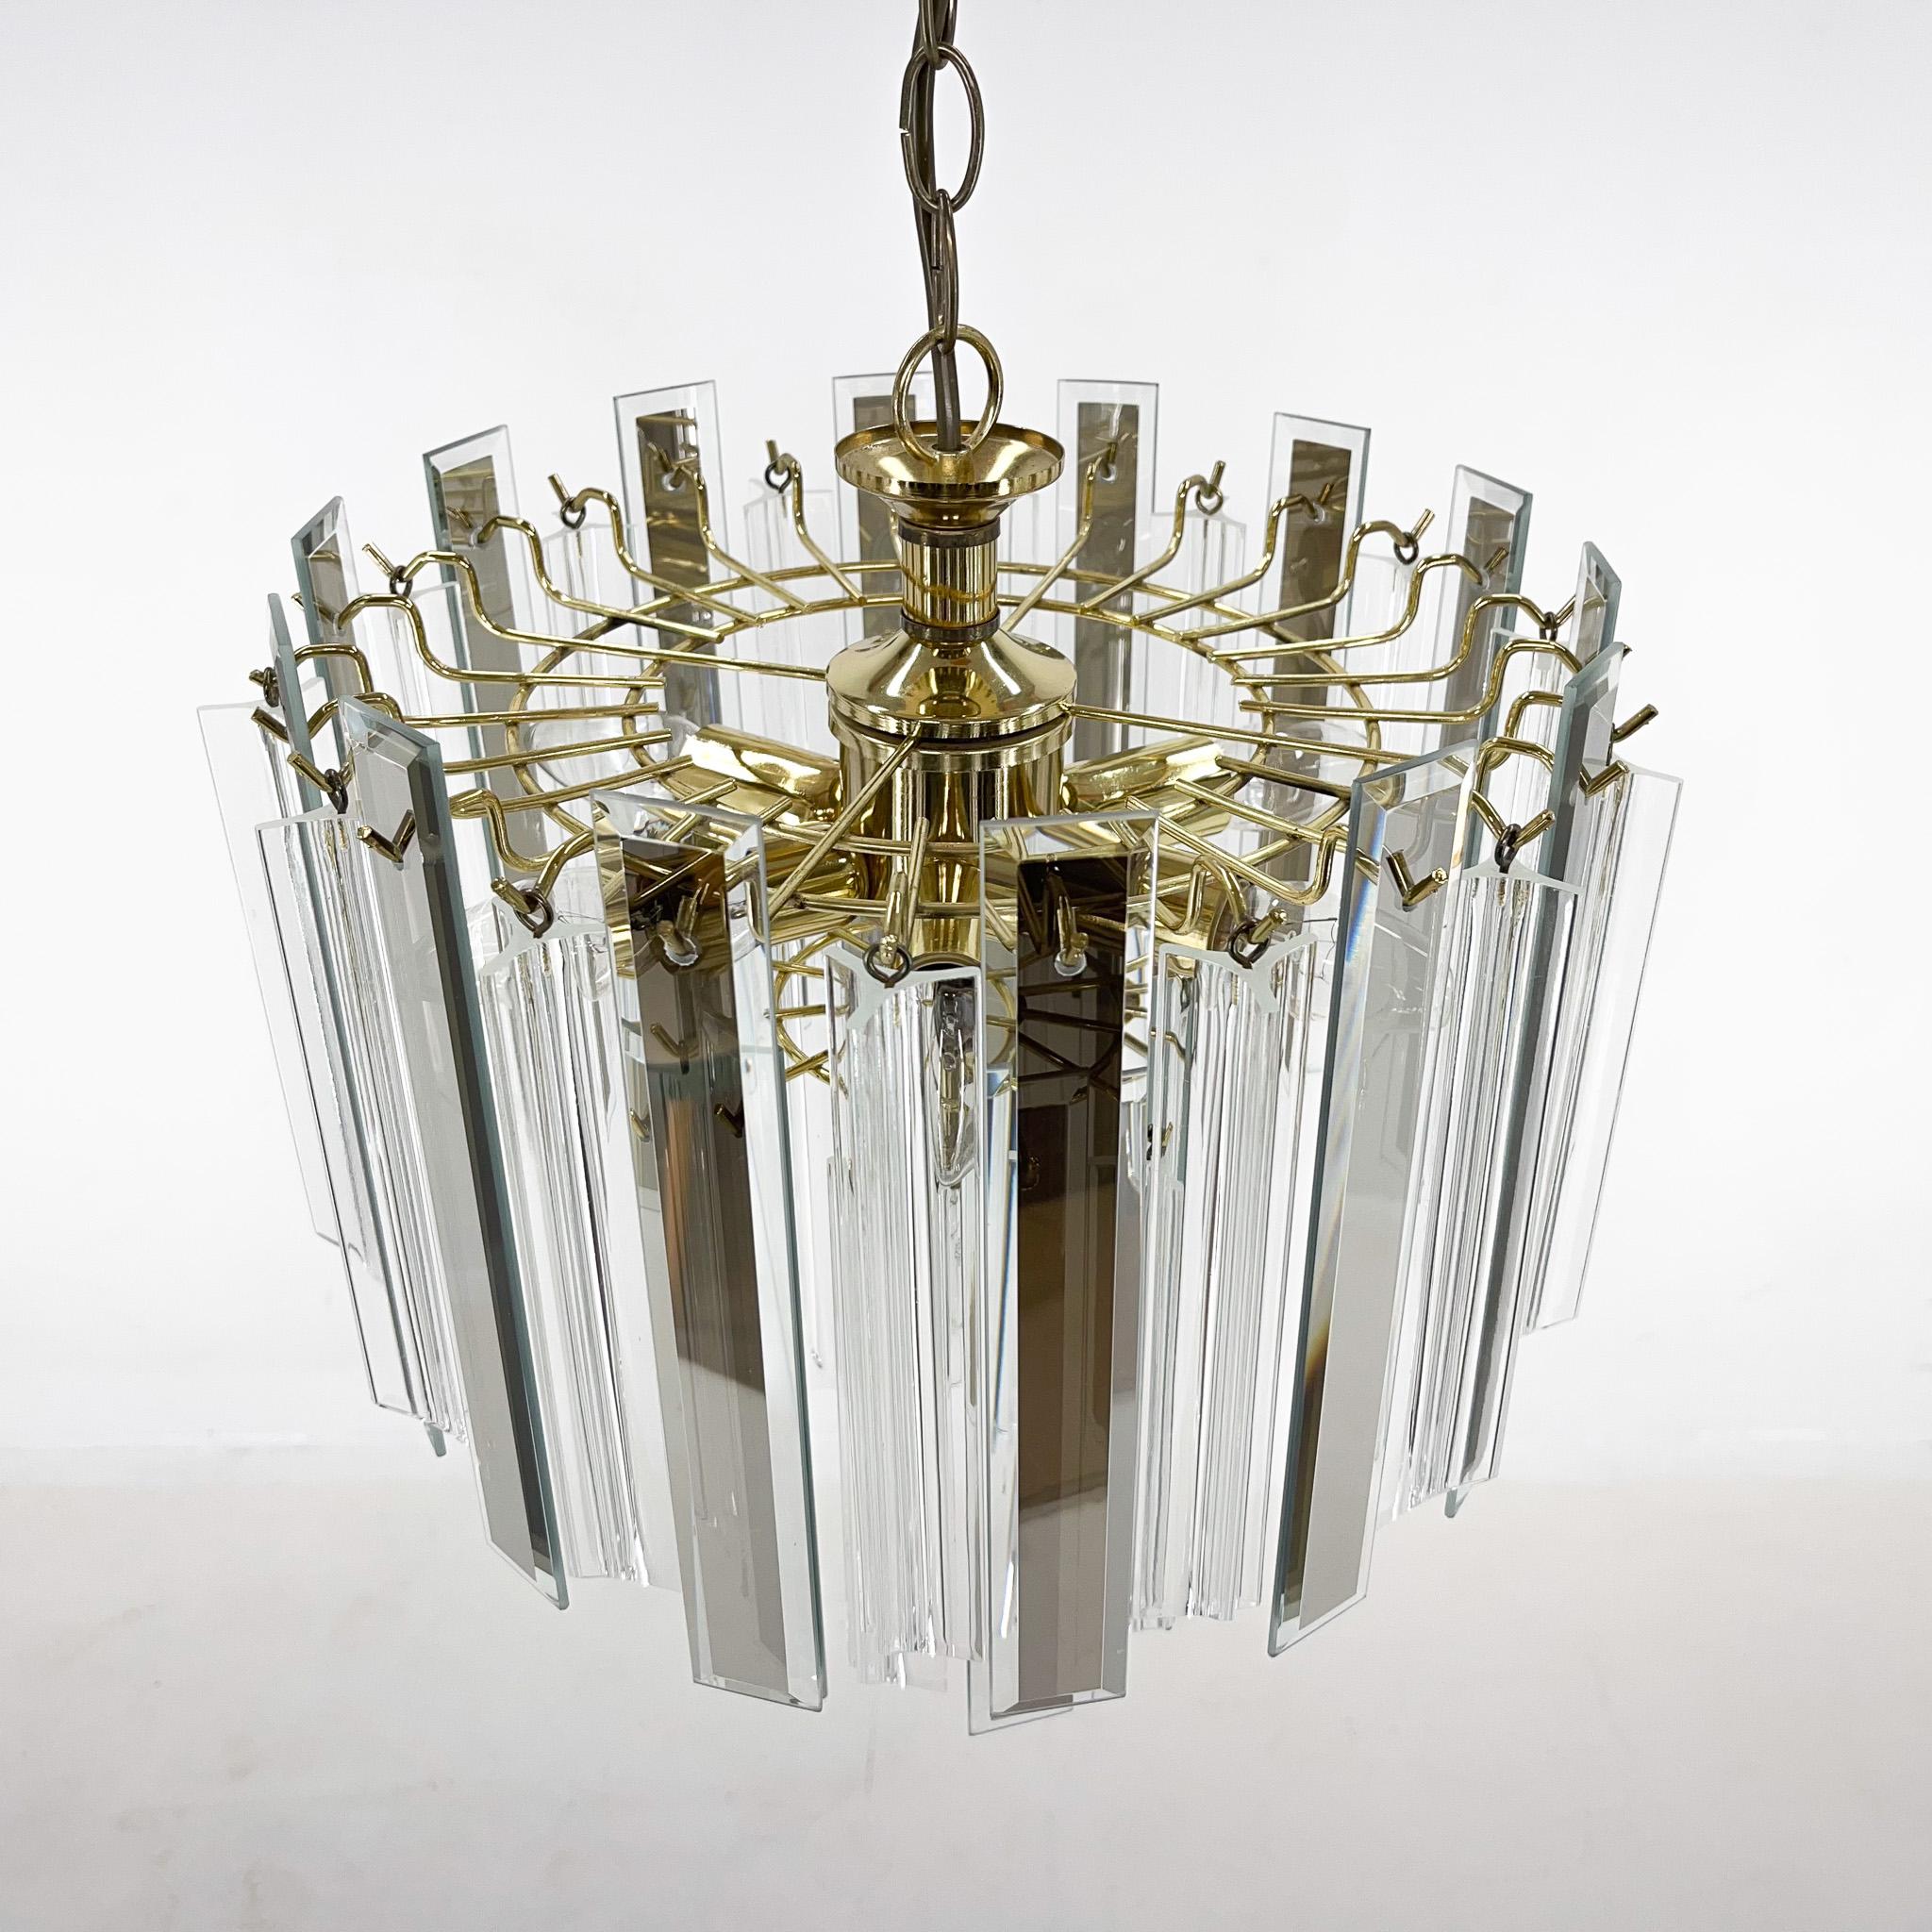 Midcentury Brass, Glass and Lucite Chandelier, Austria 1970s For Sale 6